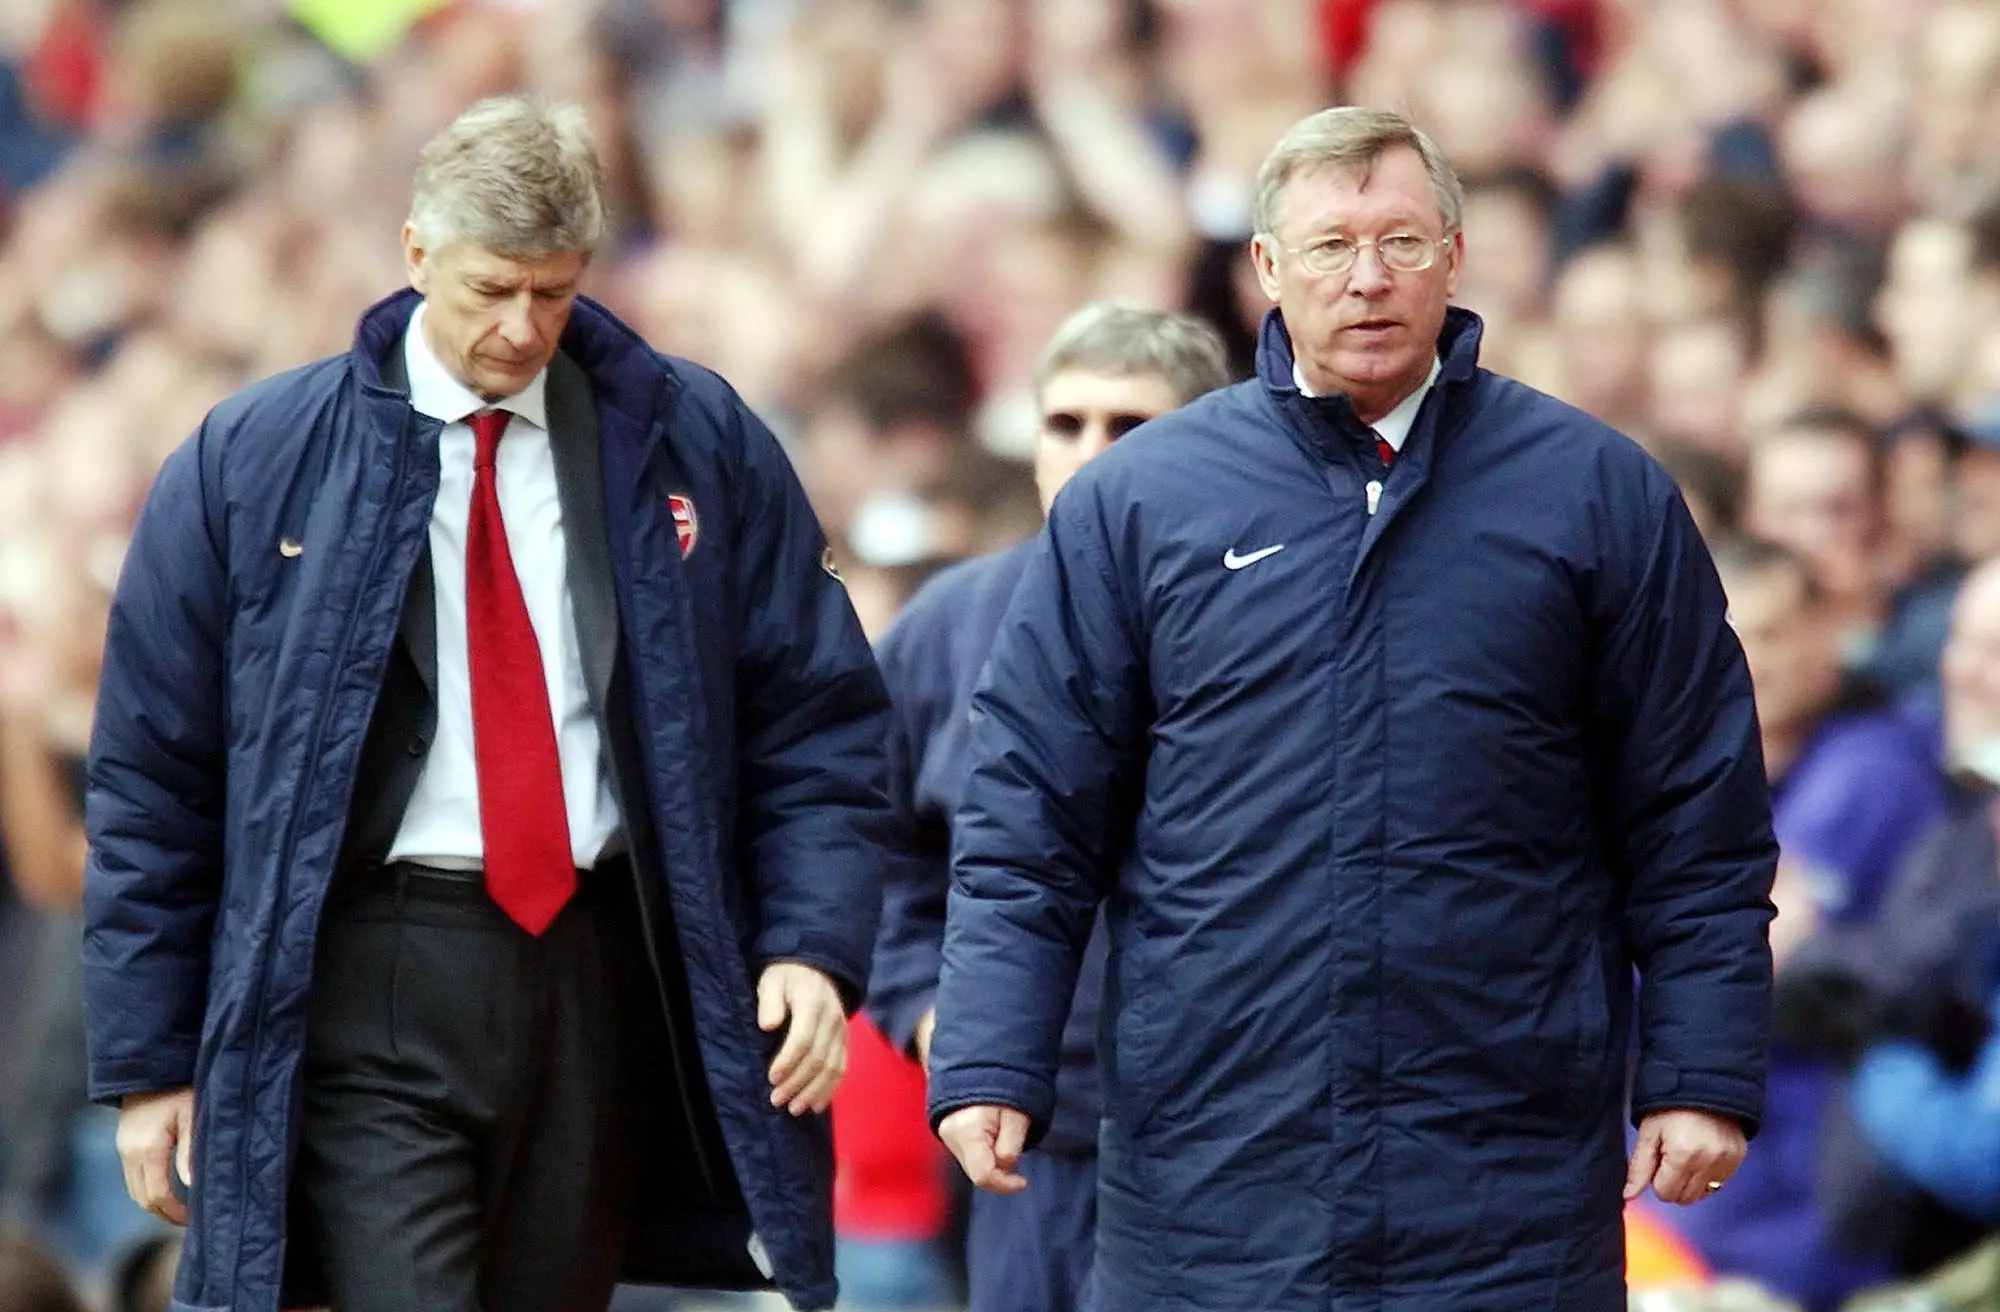 Wenger and Fergie didn't always get on. Image: PA Images